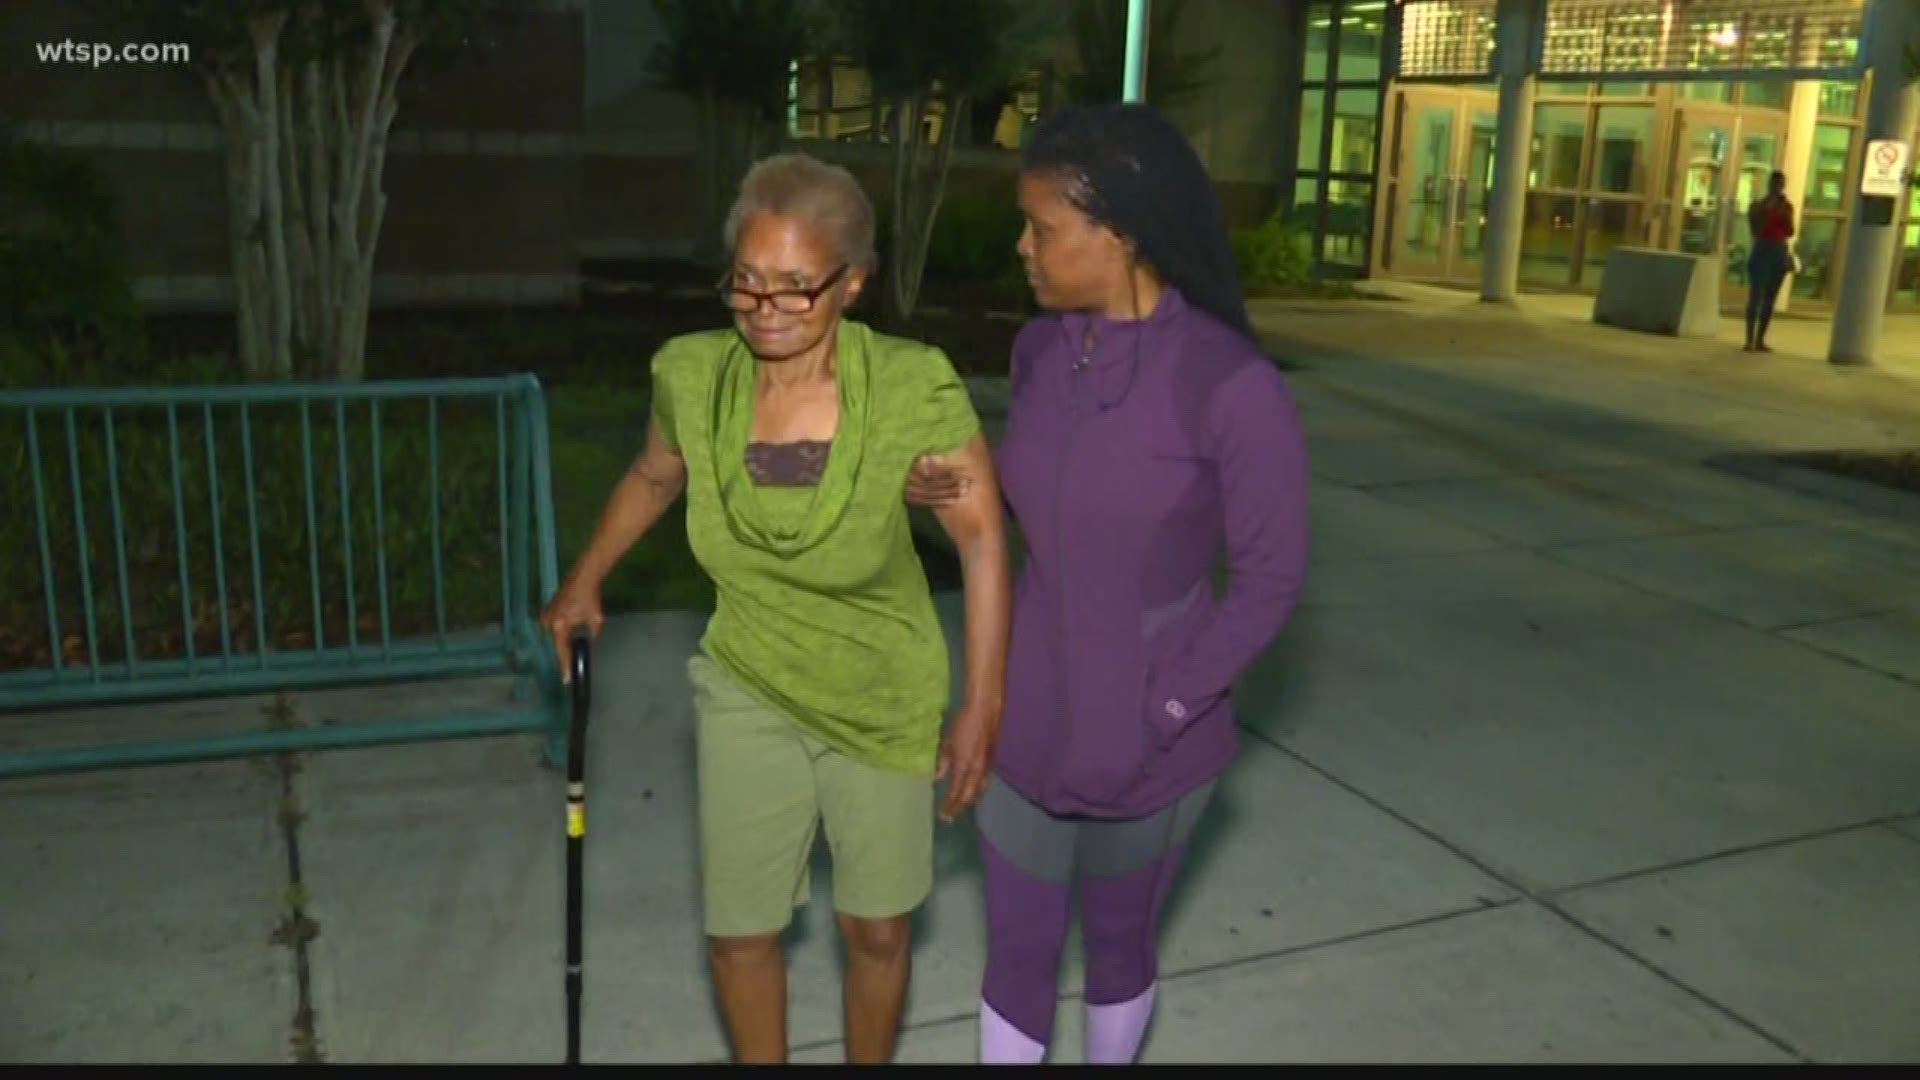 A 75-year-old woman was locked up and held in contempt of court. Her family said she’s being treated poorly, in part, because of her love of animals.

Friday night, Cynthia Latson’s family was there as she was let out of jail just in time for Mother’s Day.

The 75-year-old ended up behind bars after missing court dates and being charged with contempt.